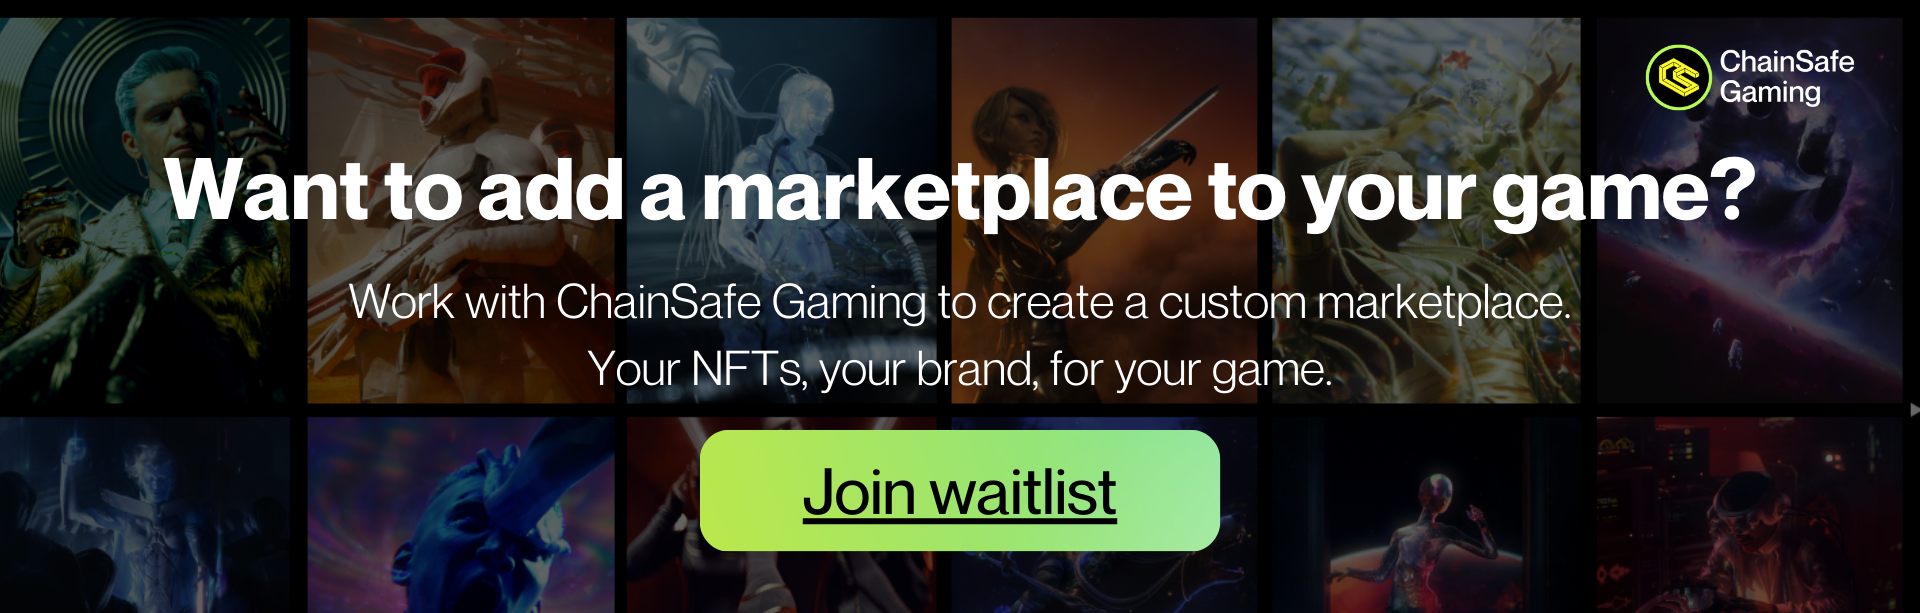 Click to join the waitlist for ChainSafe Gaming's marketplace offering.